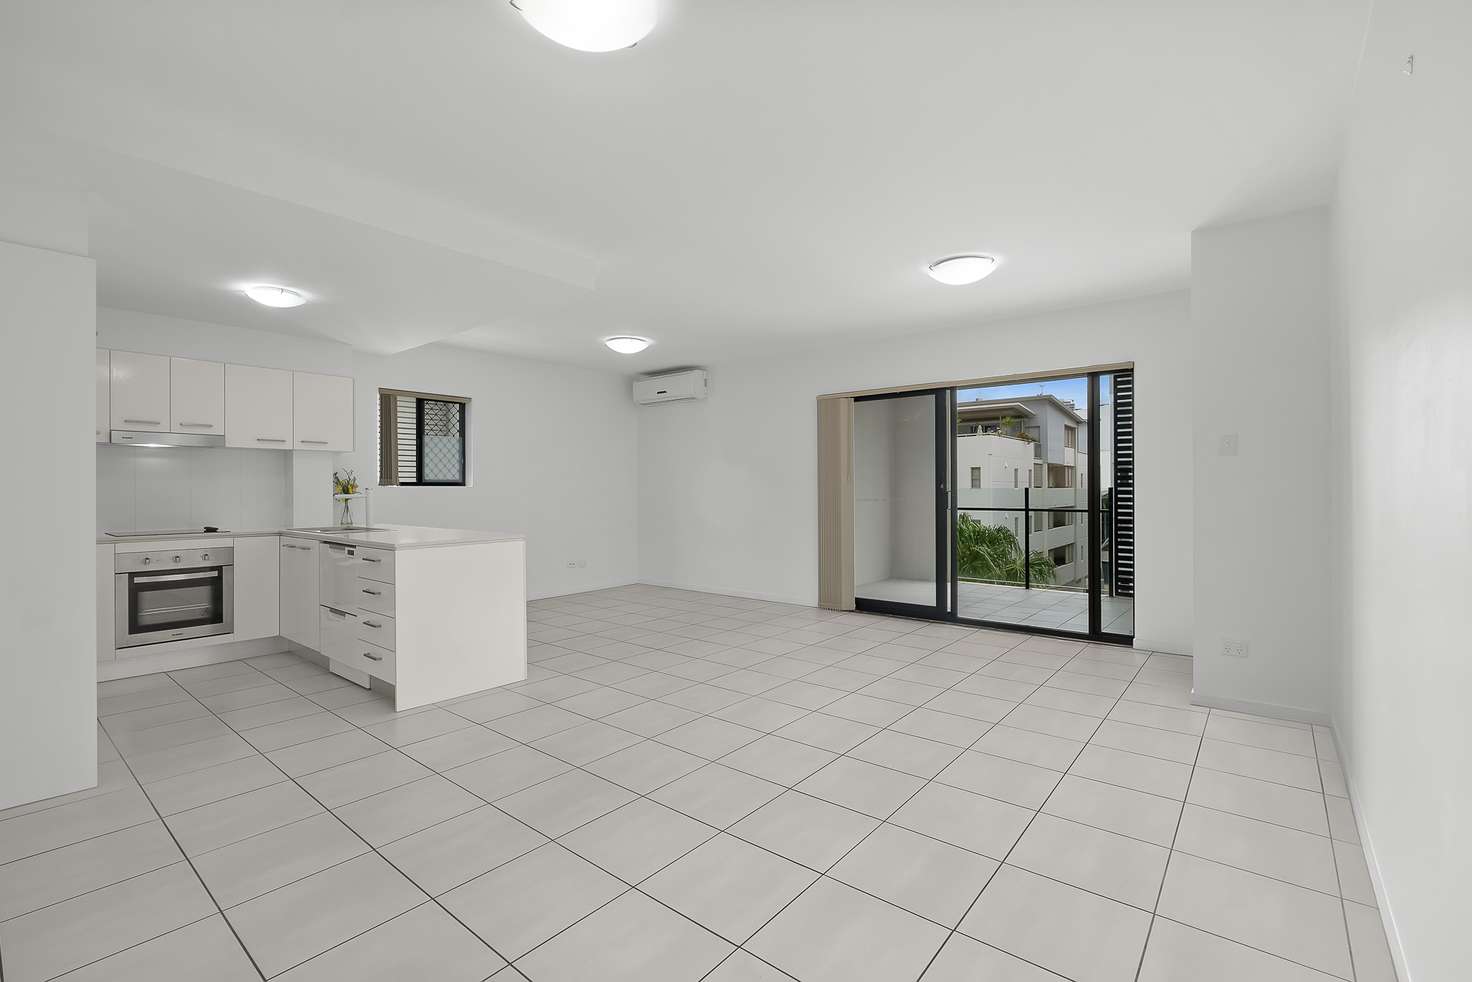 Main view of Homely apartment listing, 11/44 Cordelia St, South Brisbane QLD 4101